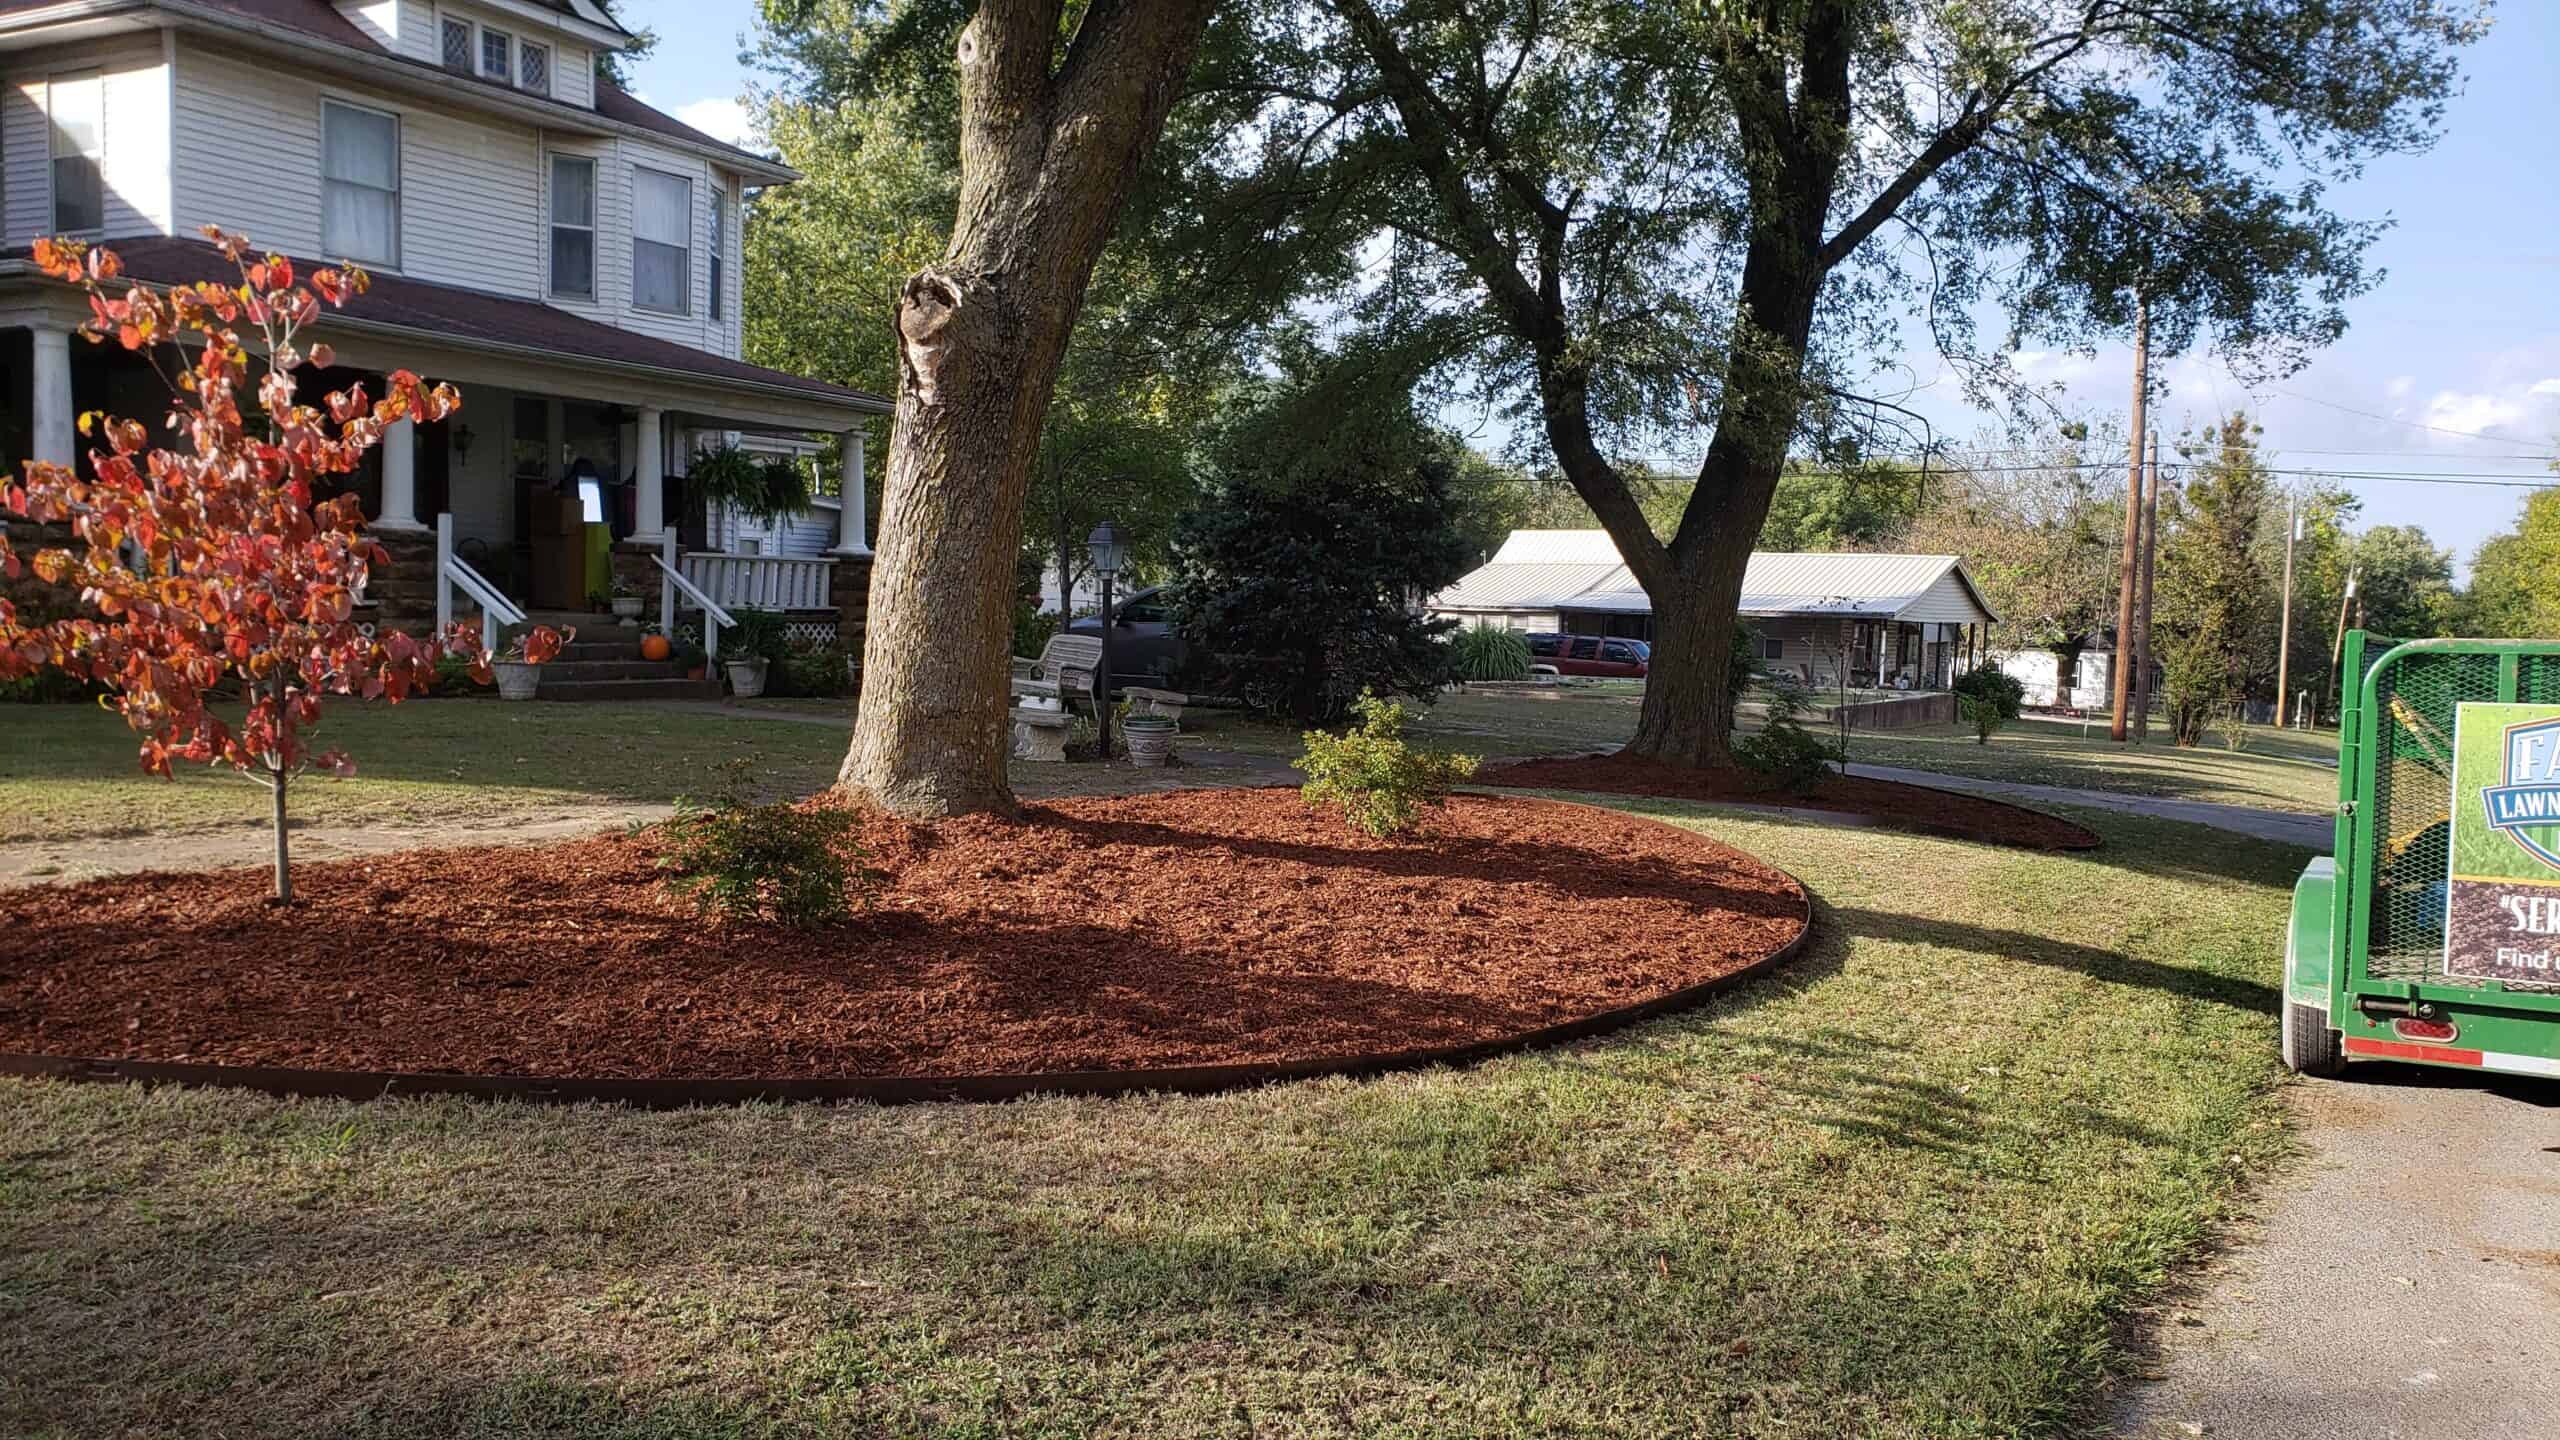 Lawn care and landscaping in OK helps ensure a safe and beautiful property 